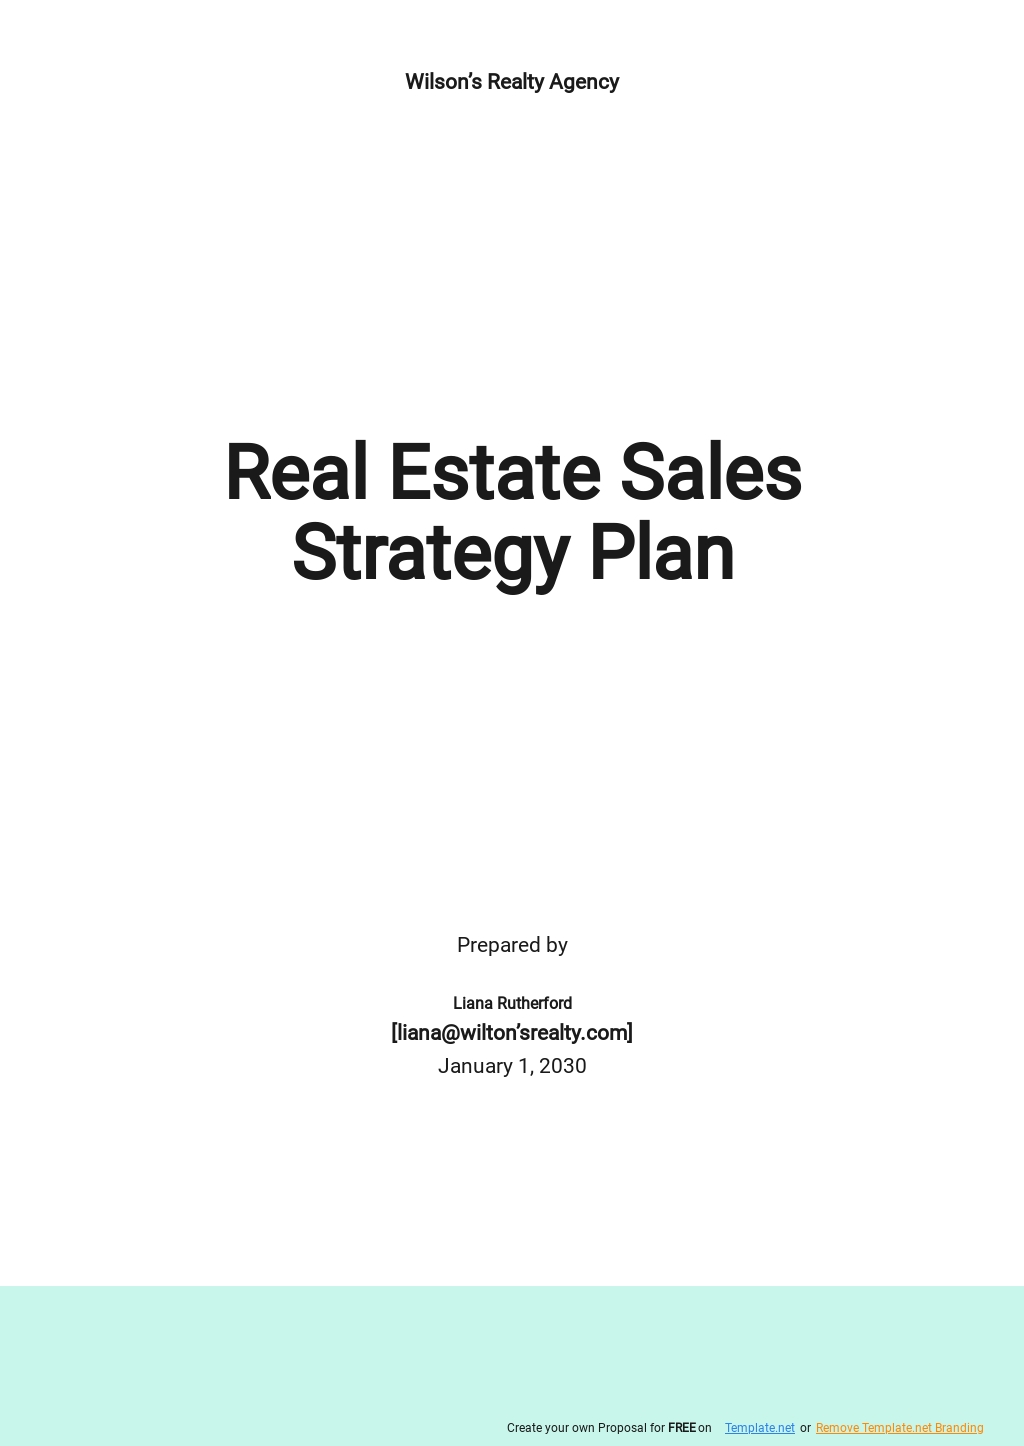 Real Estate Sales Strategy Plan Template.jpe